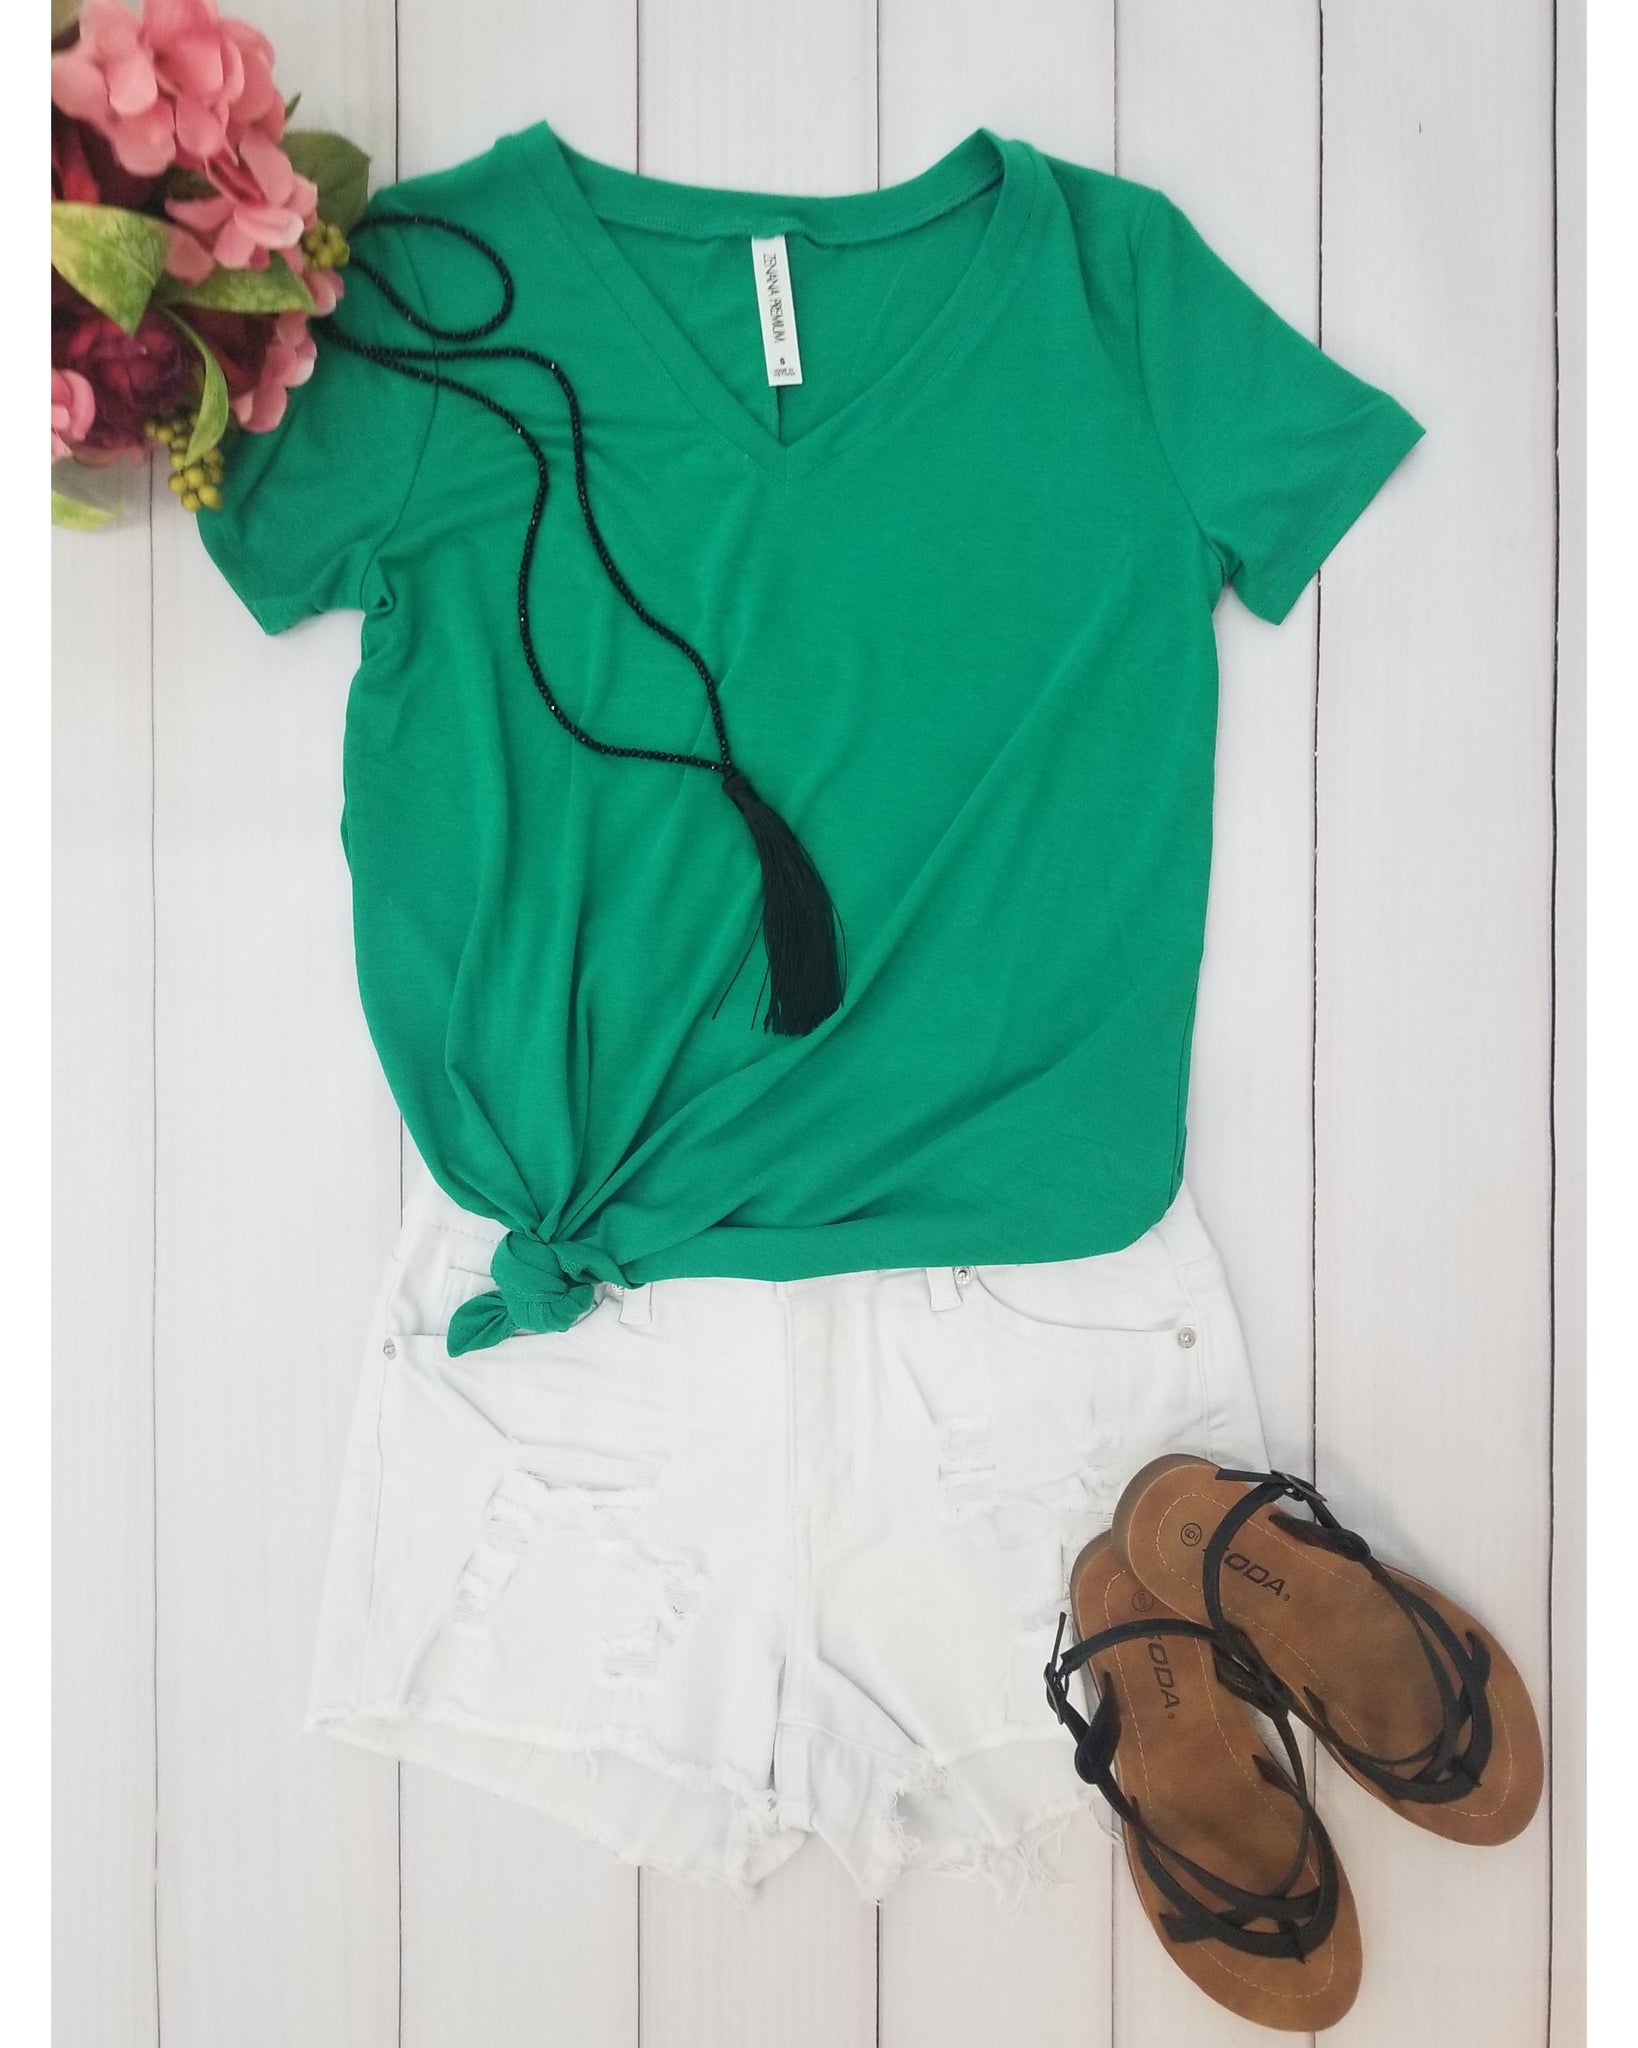 Keeping It Comfortable Relaxed Fit Short Sleeve V-Neck T-Shirt Top in Kelly Green - Essentially Elegant 